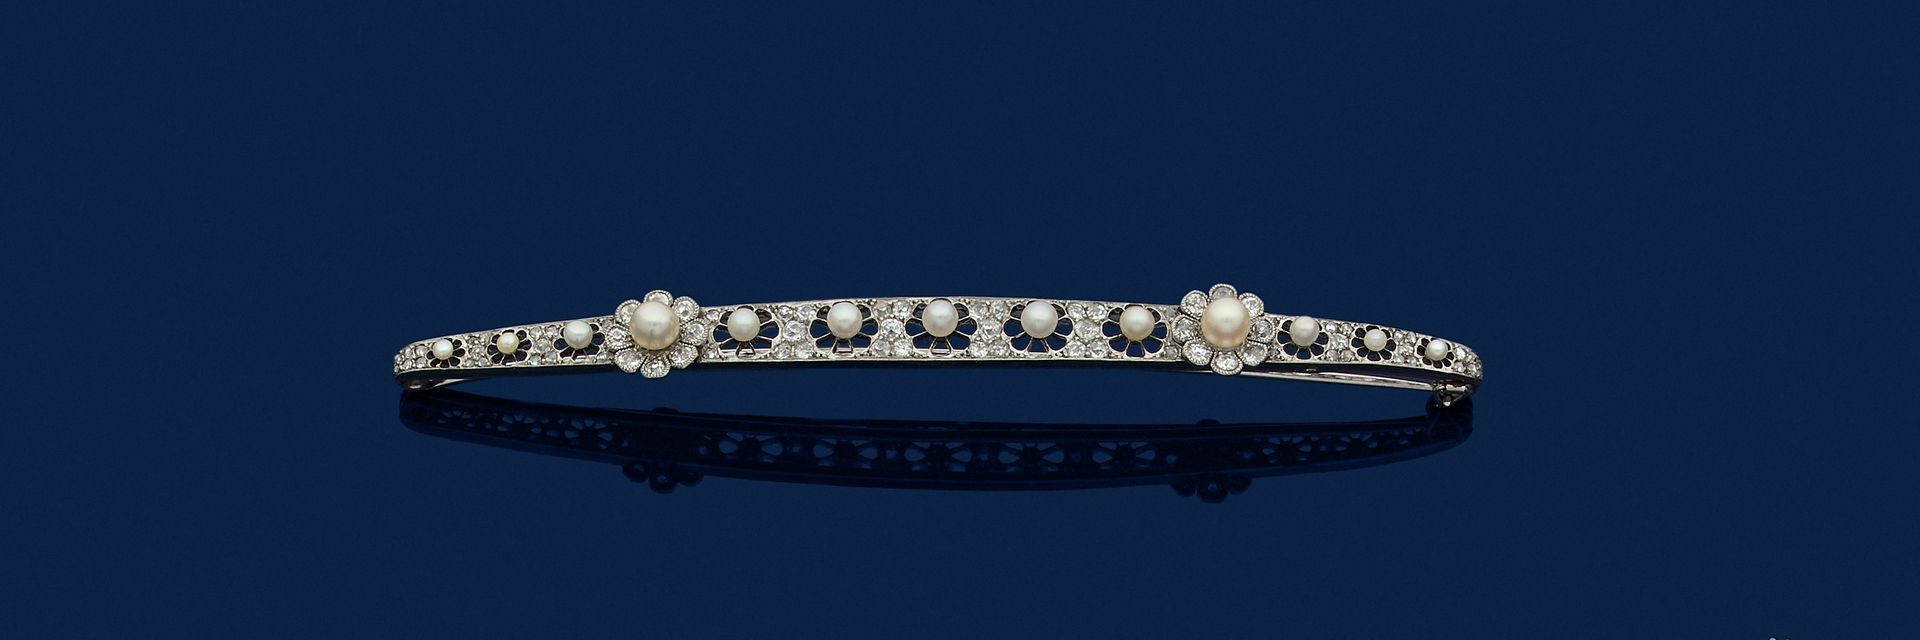 Null GEORGES FOUQUETLarge
18K (750) white gold barrette brooch set with pearls i&hellip;